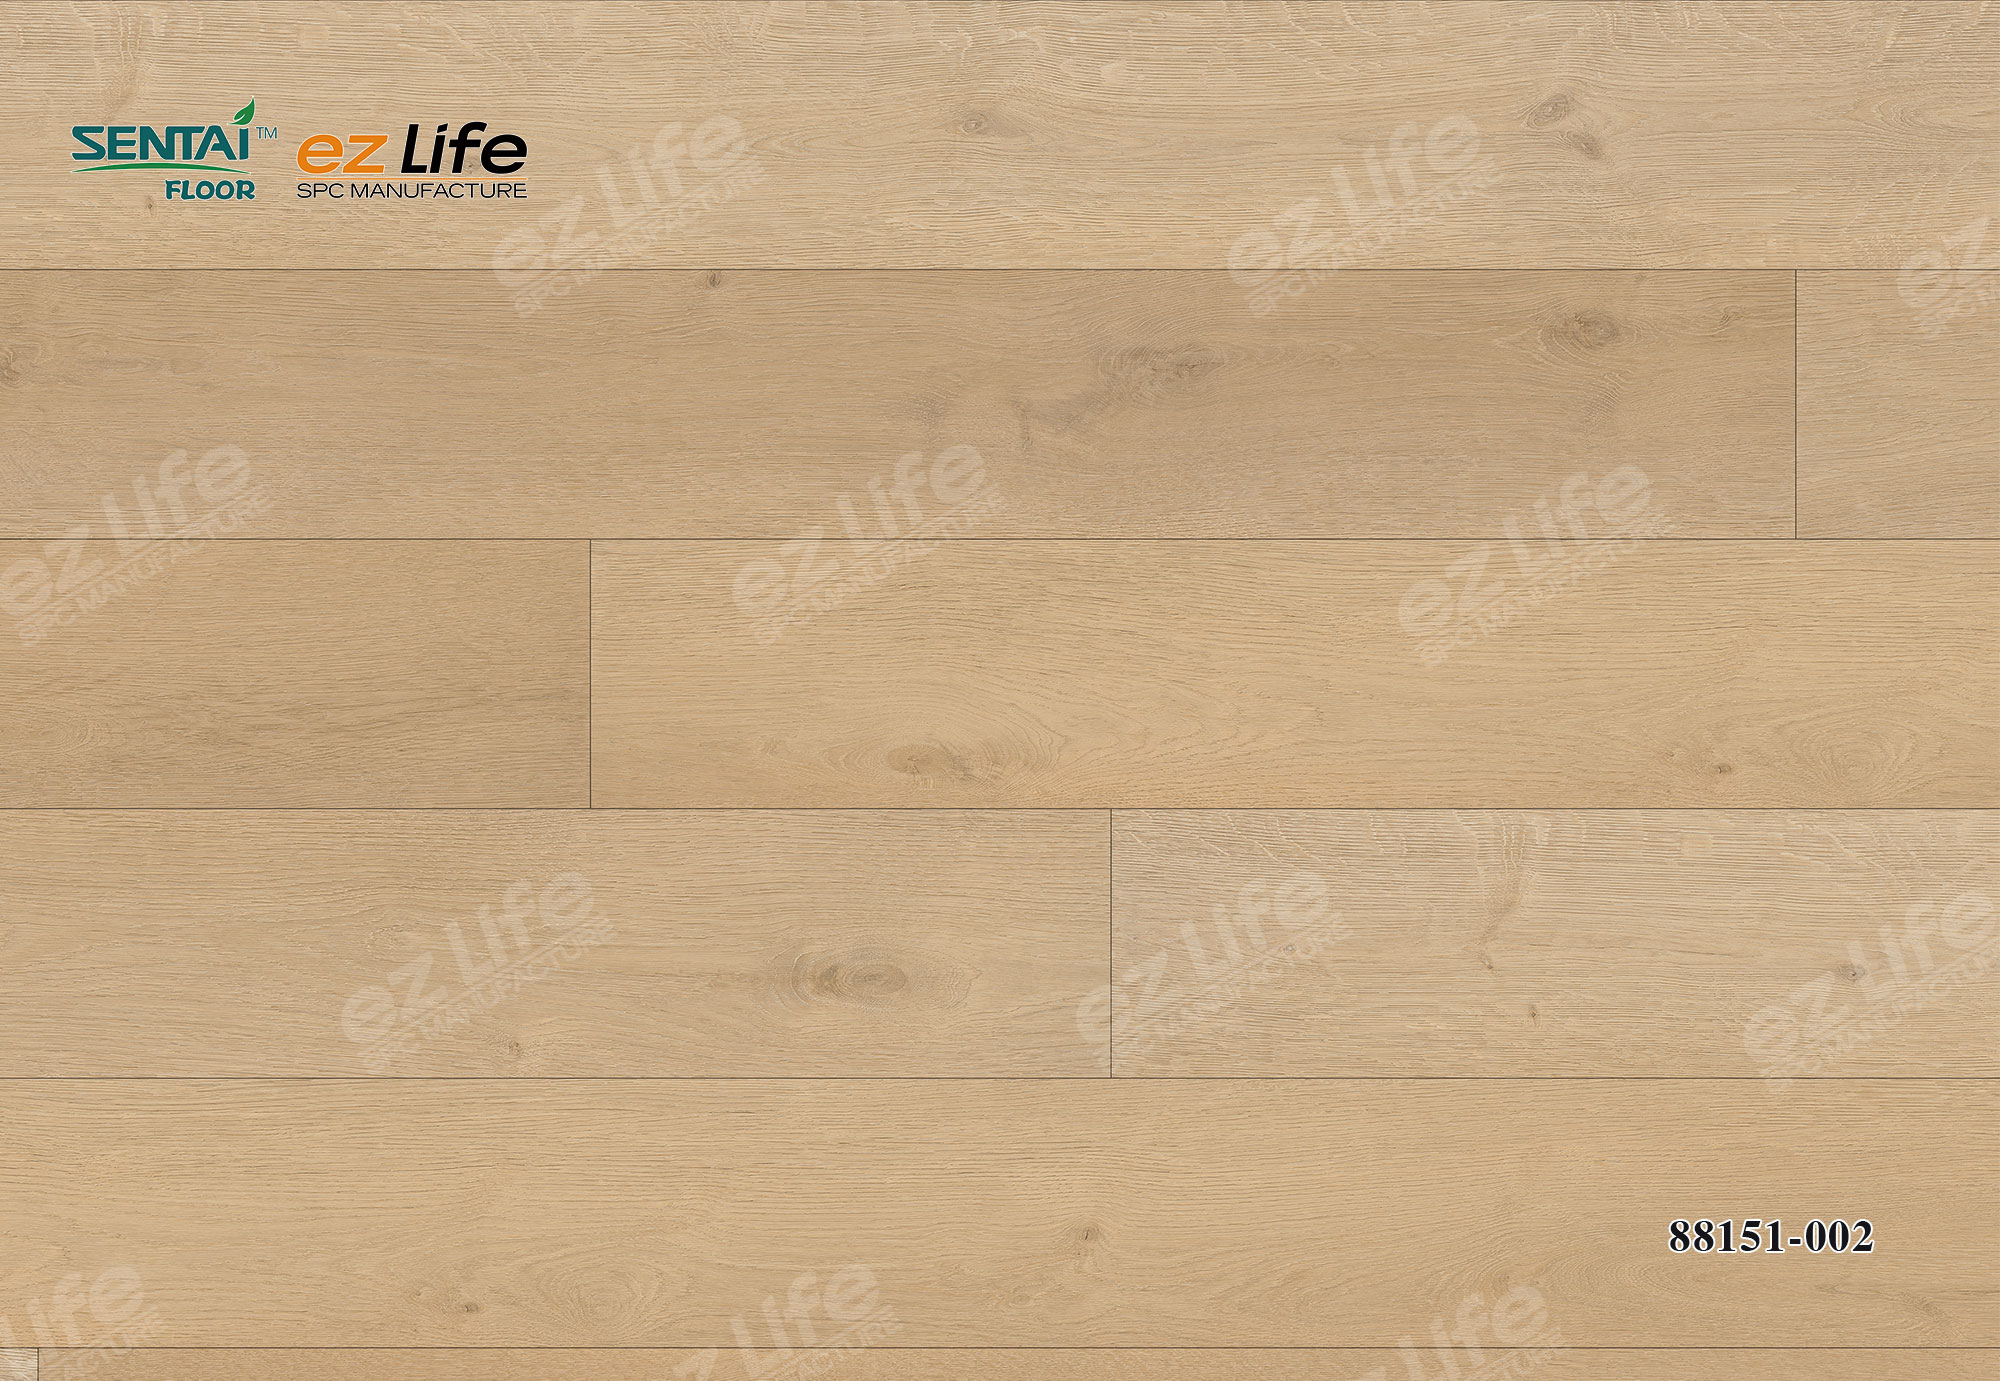 The innovative direction and market trend of wood veneer flooring